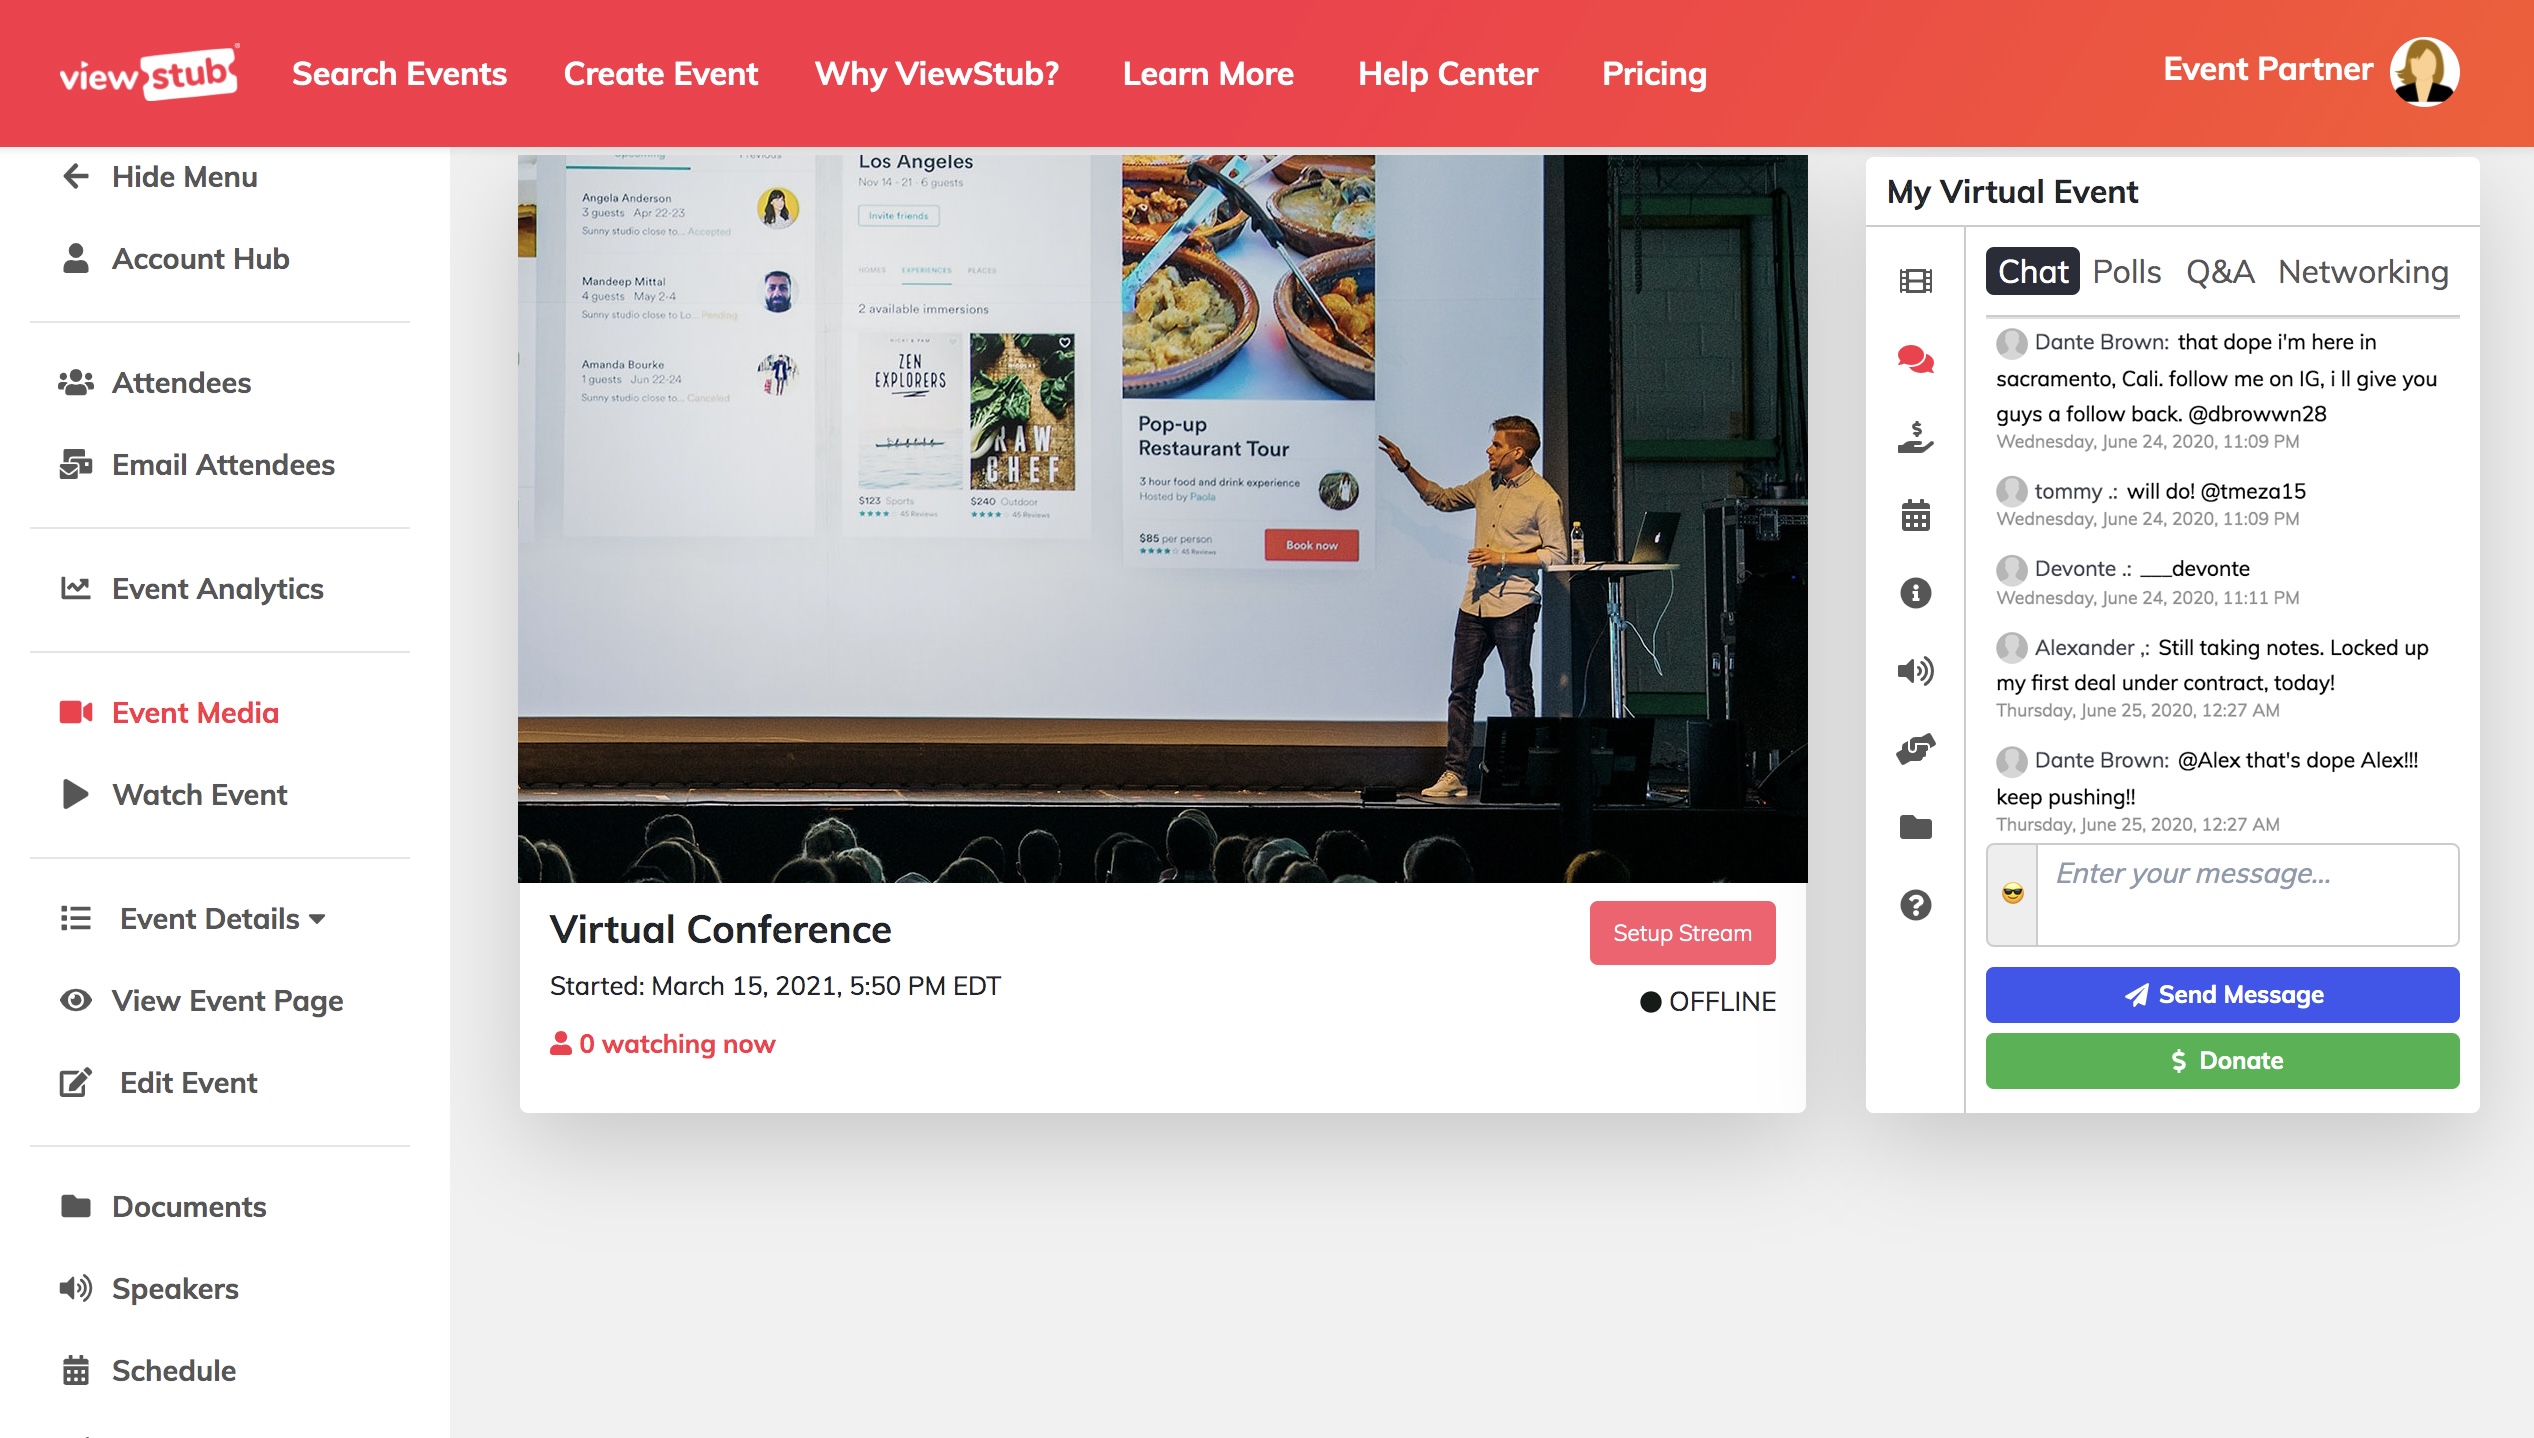 ViewStub Engagement Panel delivers features built to keep your virtual audience engaged. Equipped with a live chat, 1:1 networking, polling, donation features, and much more -  attendees from around the globe will feel like they are there in-person!